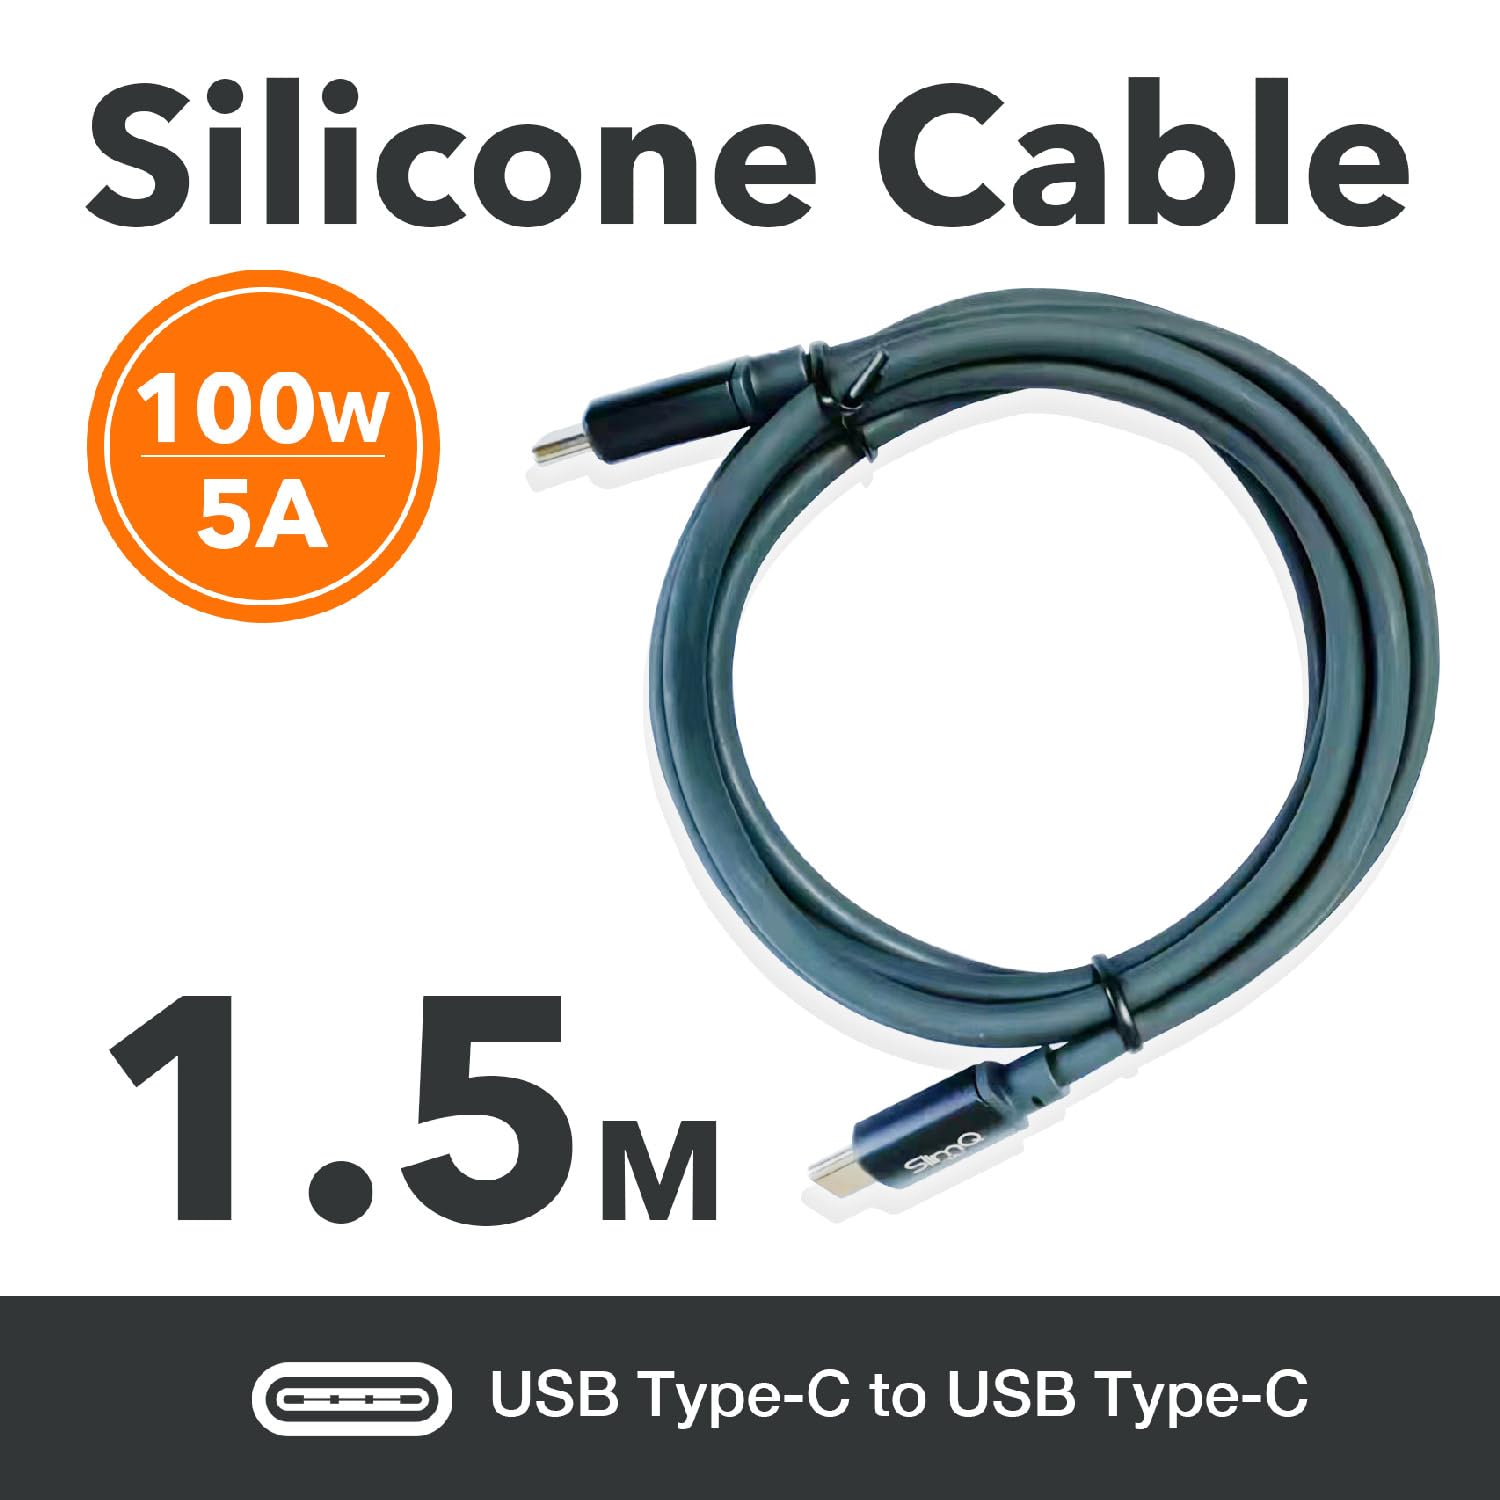 SlimQ 𝗦𝗹𝗶𝗺𝗤 USB C to USB C Charging Cable, Type-C to Type-C, C to C 3a for Mobile Phones, 100w Power for Laptops